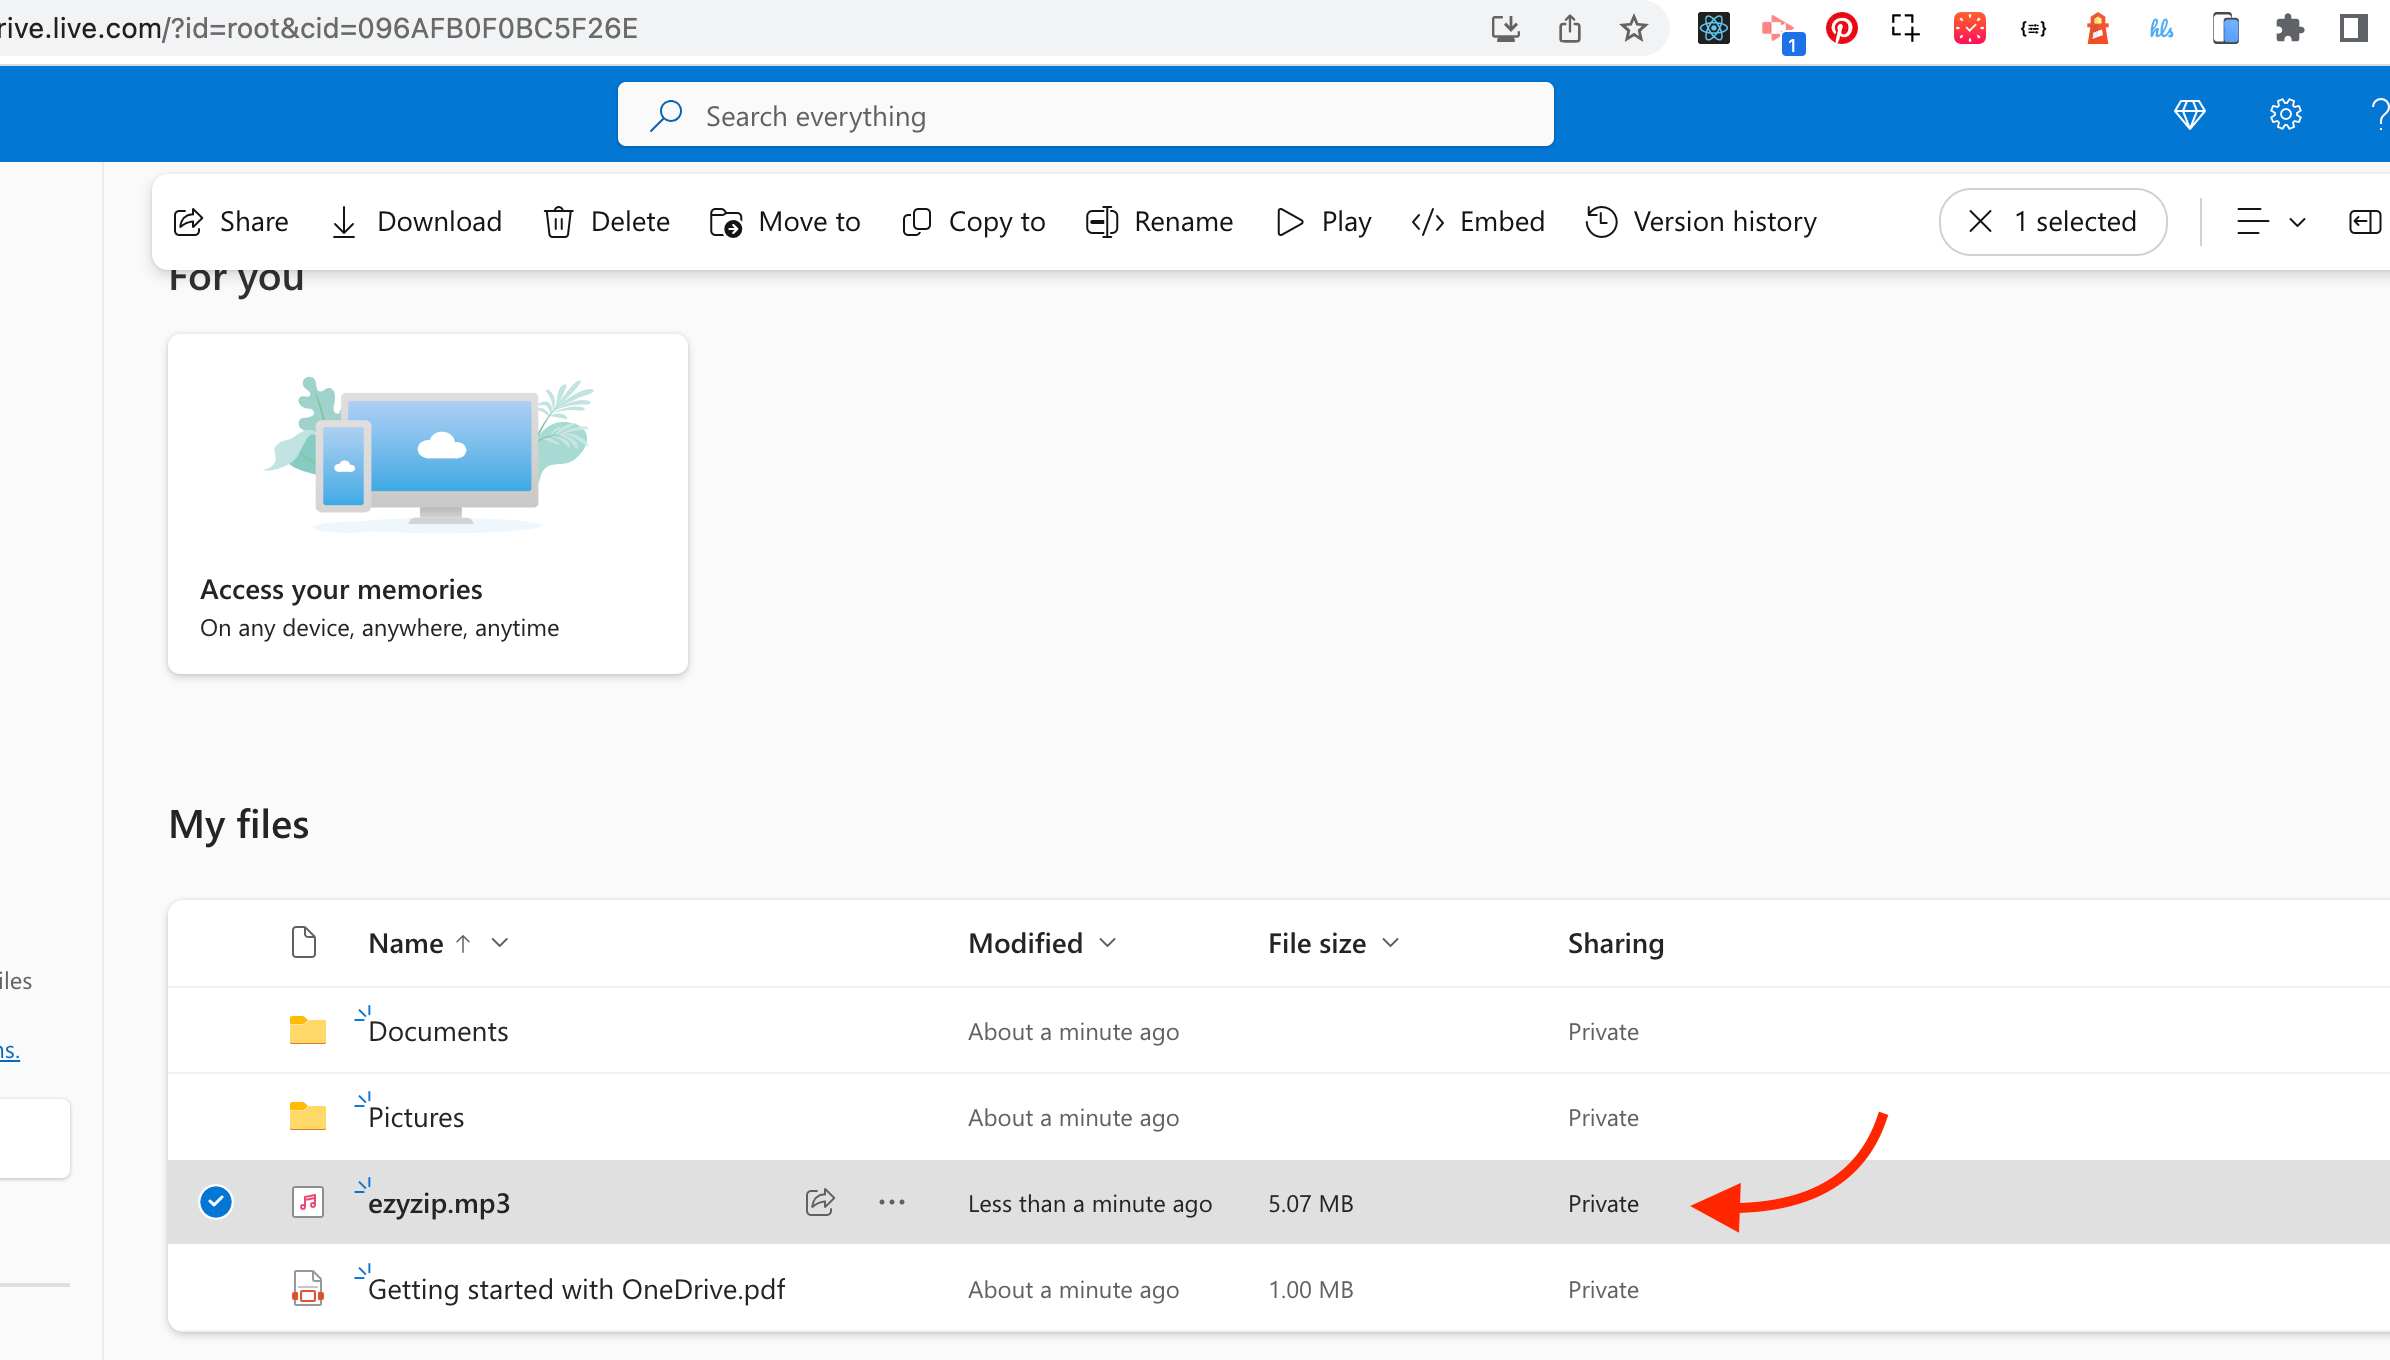 How To Upload Files Using OneDrive: Step 5